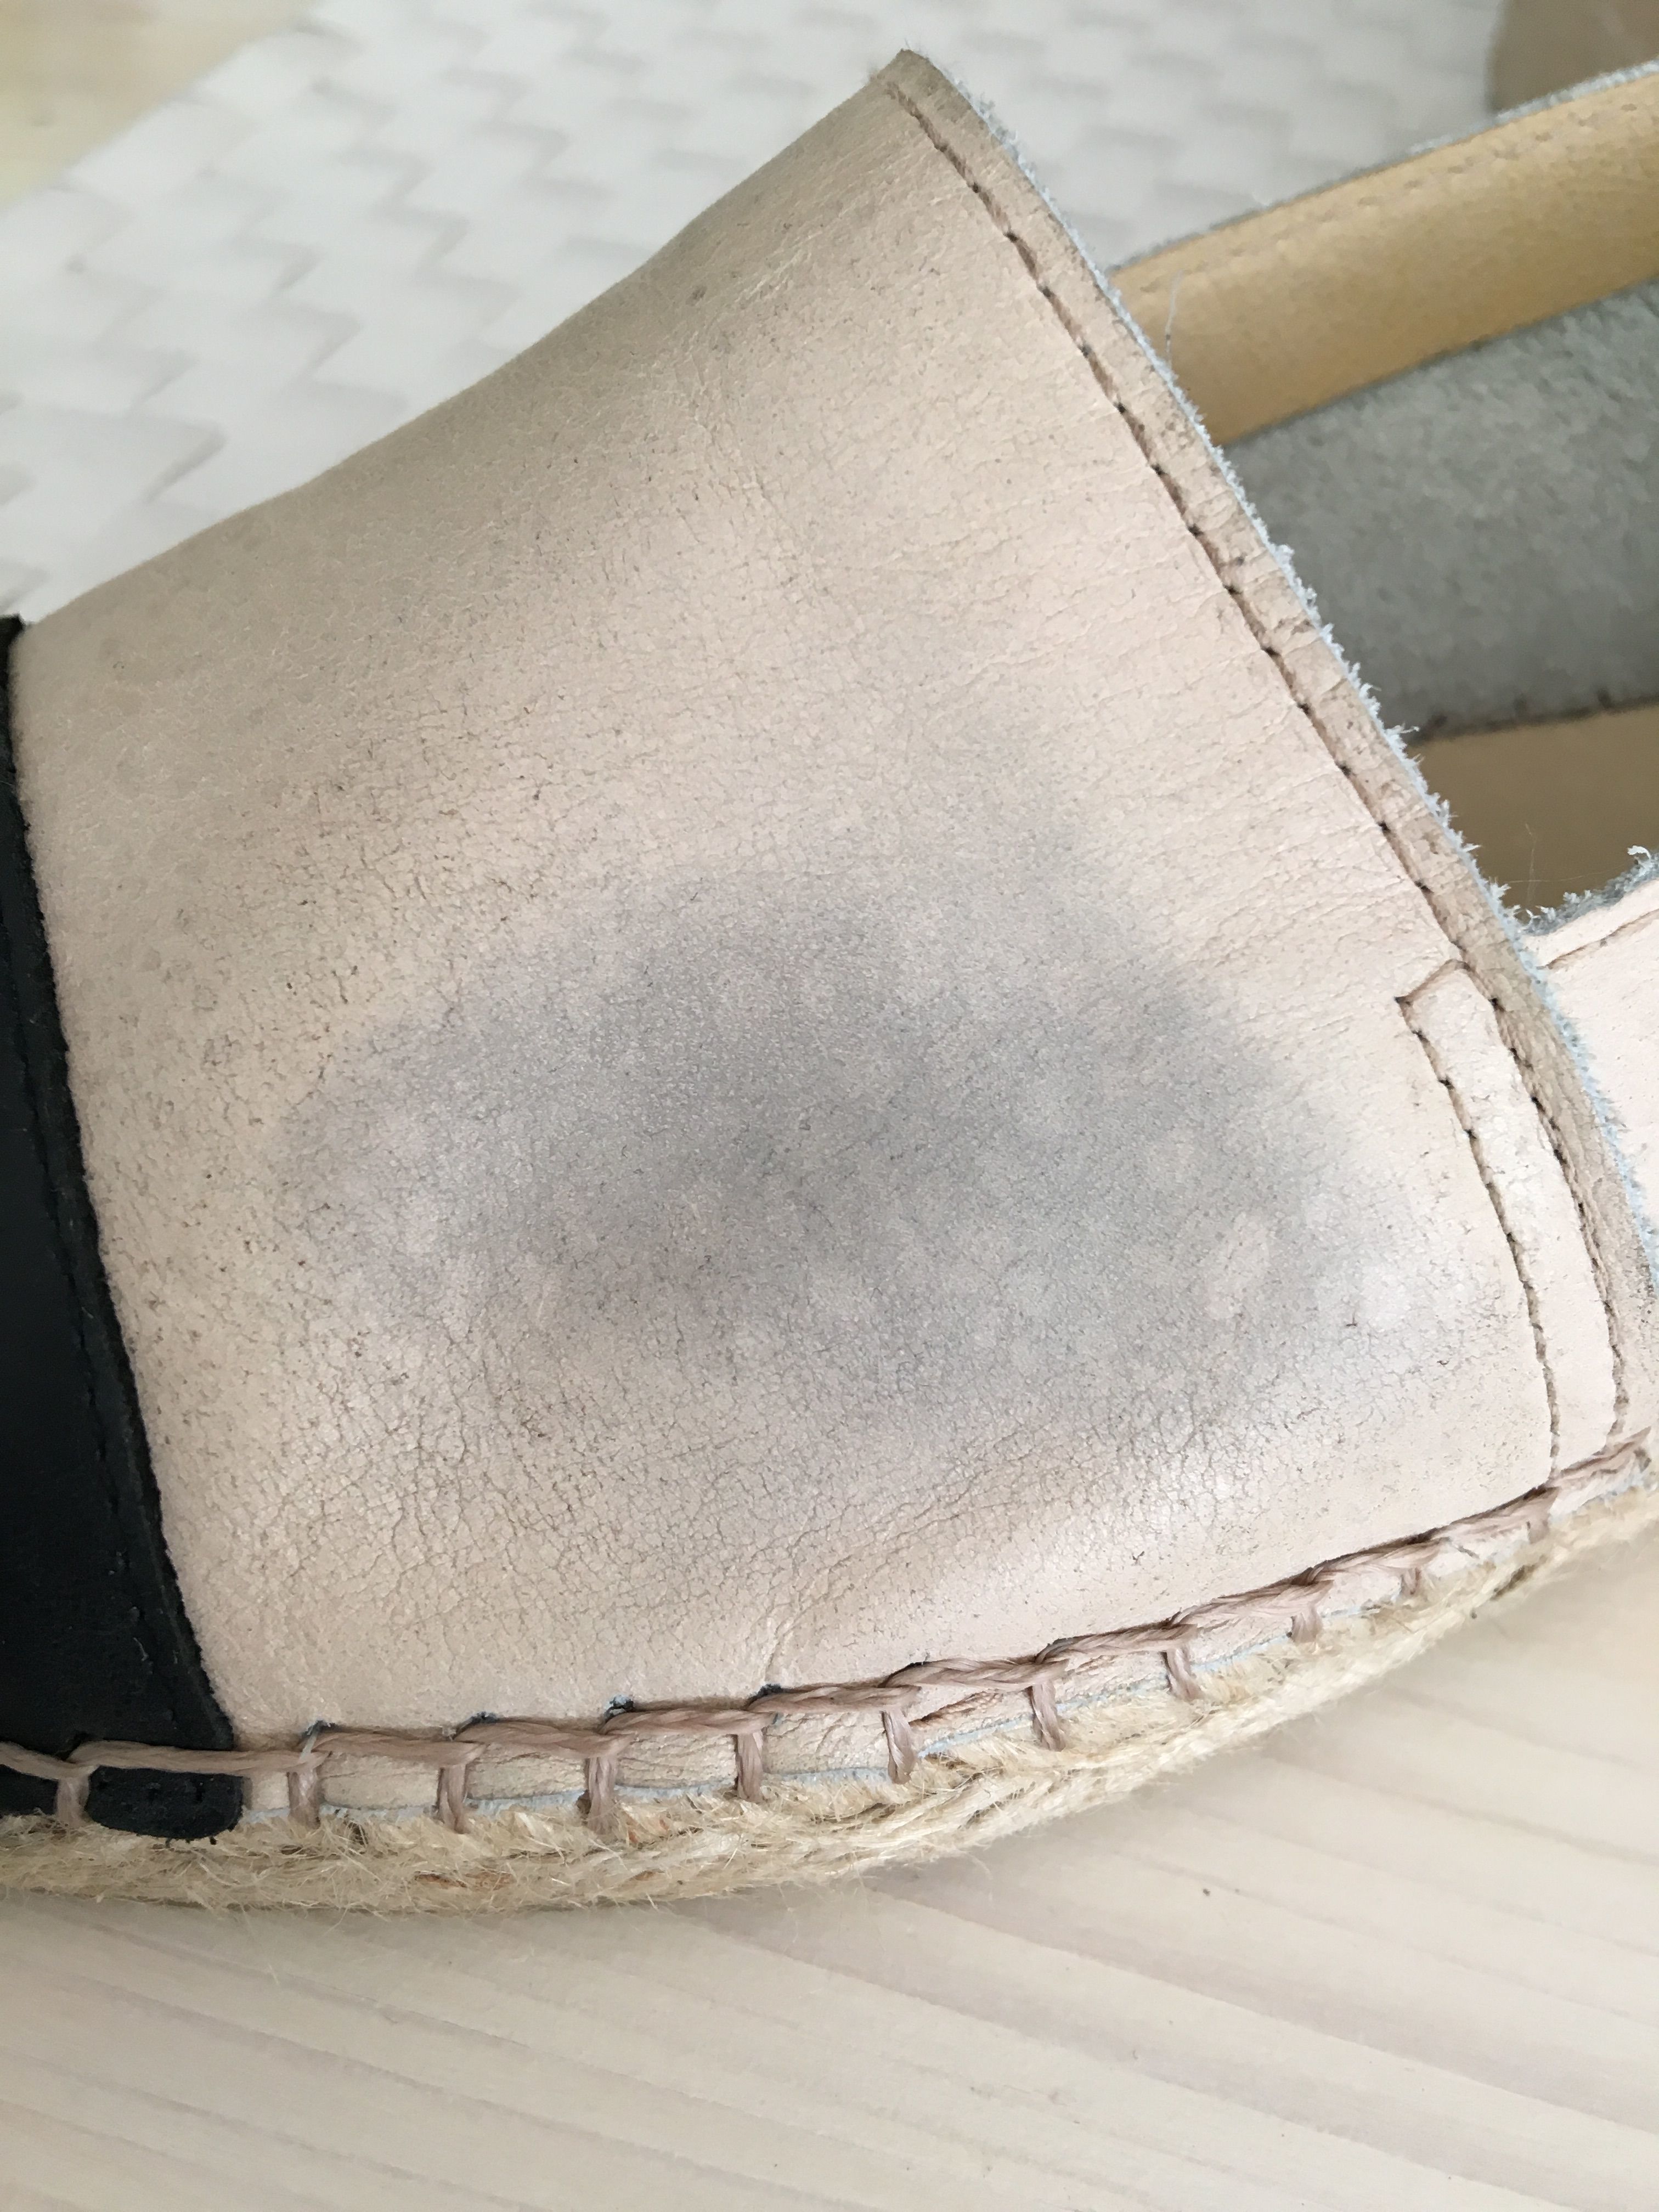 Coconut oil ruined my leather shoes! | Styleforum